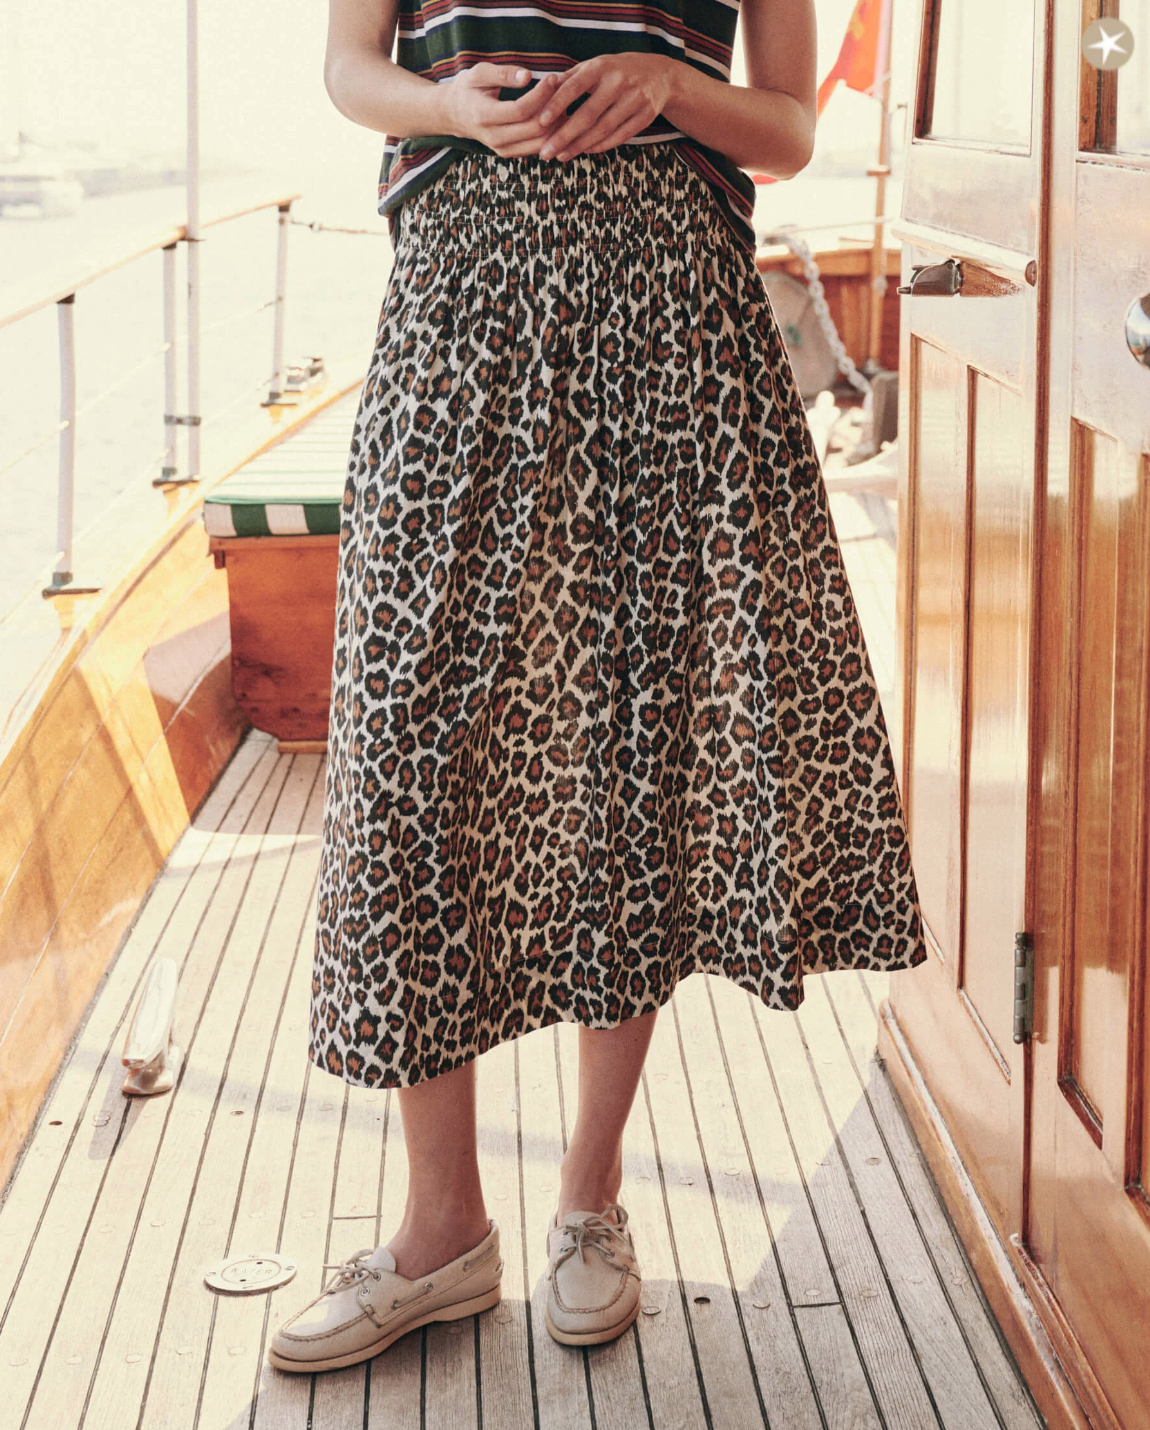 Person standing on a wooden deck of a boat, wearing The Viola Skirt by The Great Inc. with a smocked waistband and white boat shoes. They are holding an object in both hands at waist height. Sunlight filters through, casting shadows on the deck.